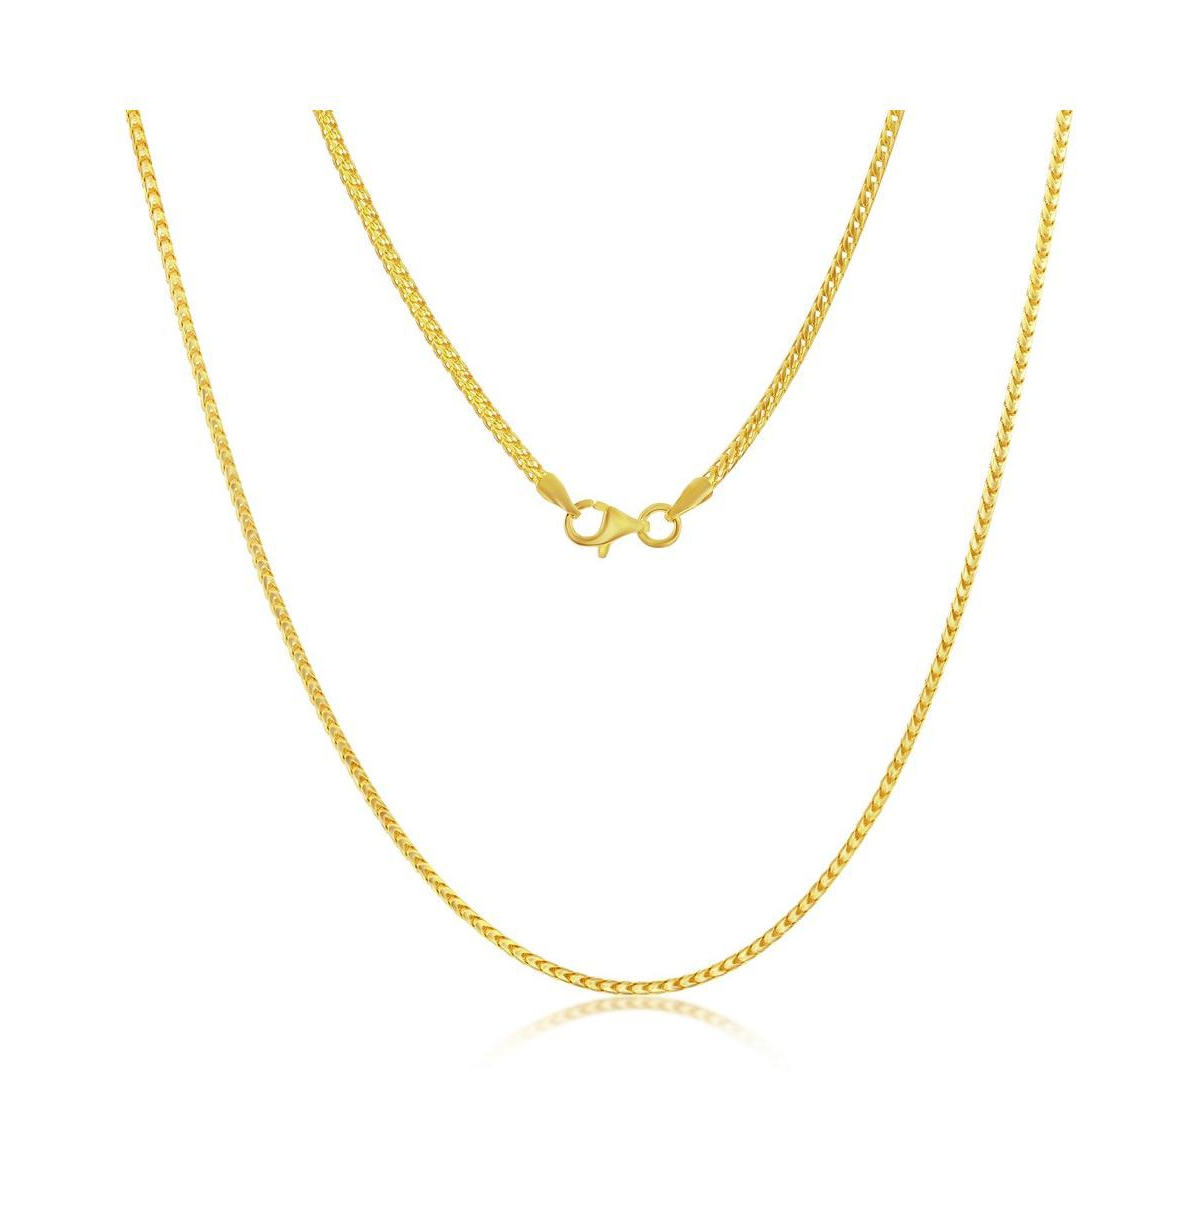 Franco Chain 1.5mm Sterling Silver or Gold Plated Over Sterling Silver 22" Necklace - Silver